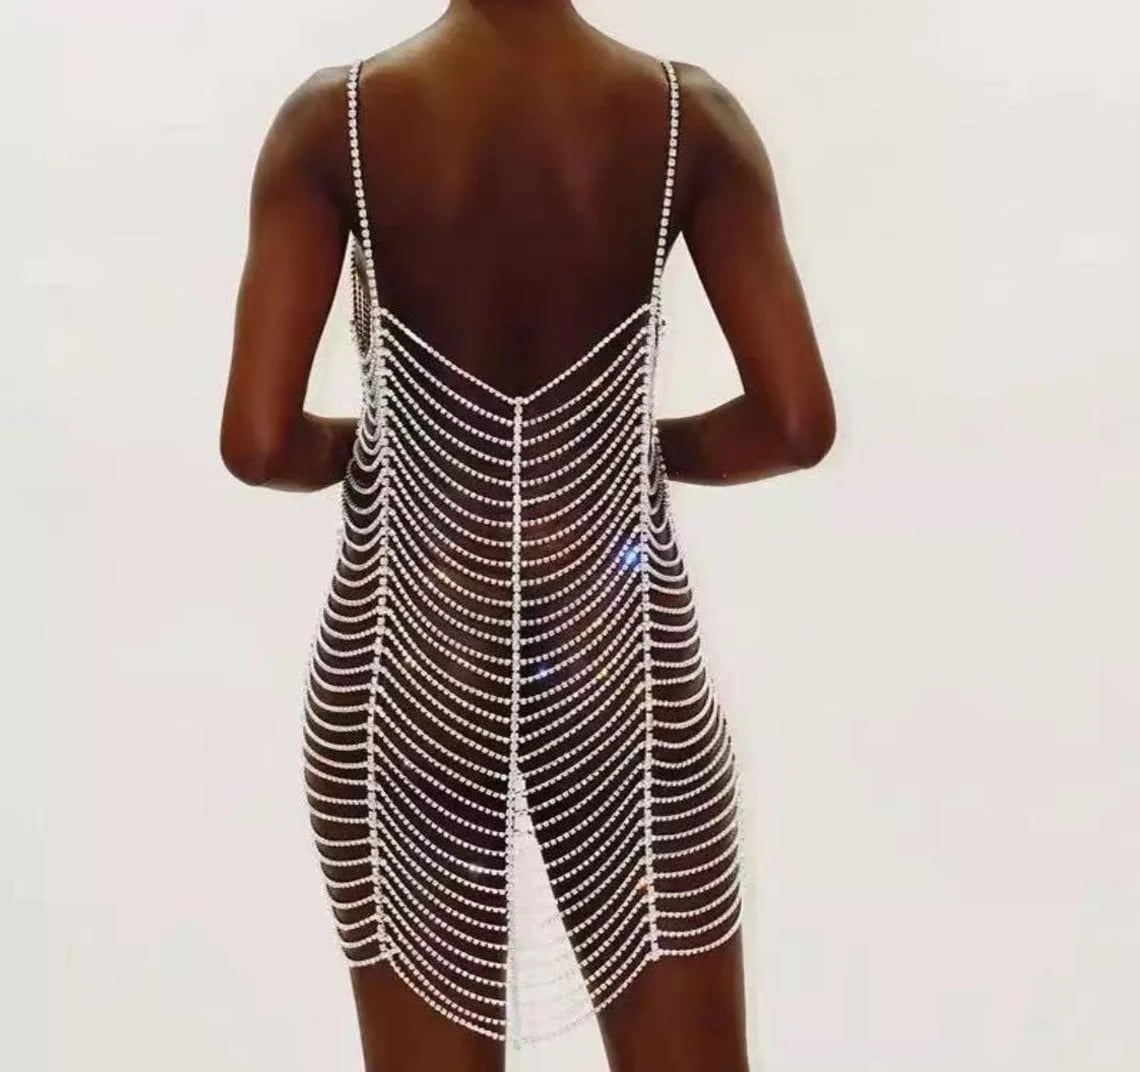 Sexy Rhinestone Body Chain Dress | See Megan Thee Stallion's Chain-Mail Dress Drip Down Her Curves in the "SG" Video | Fashion Photo 15